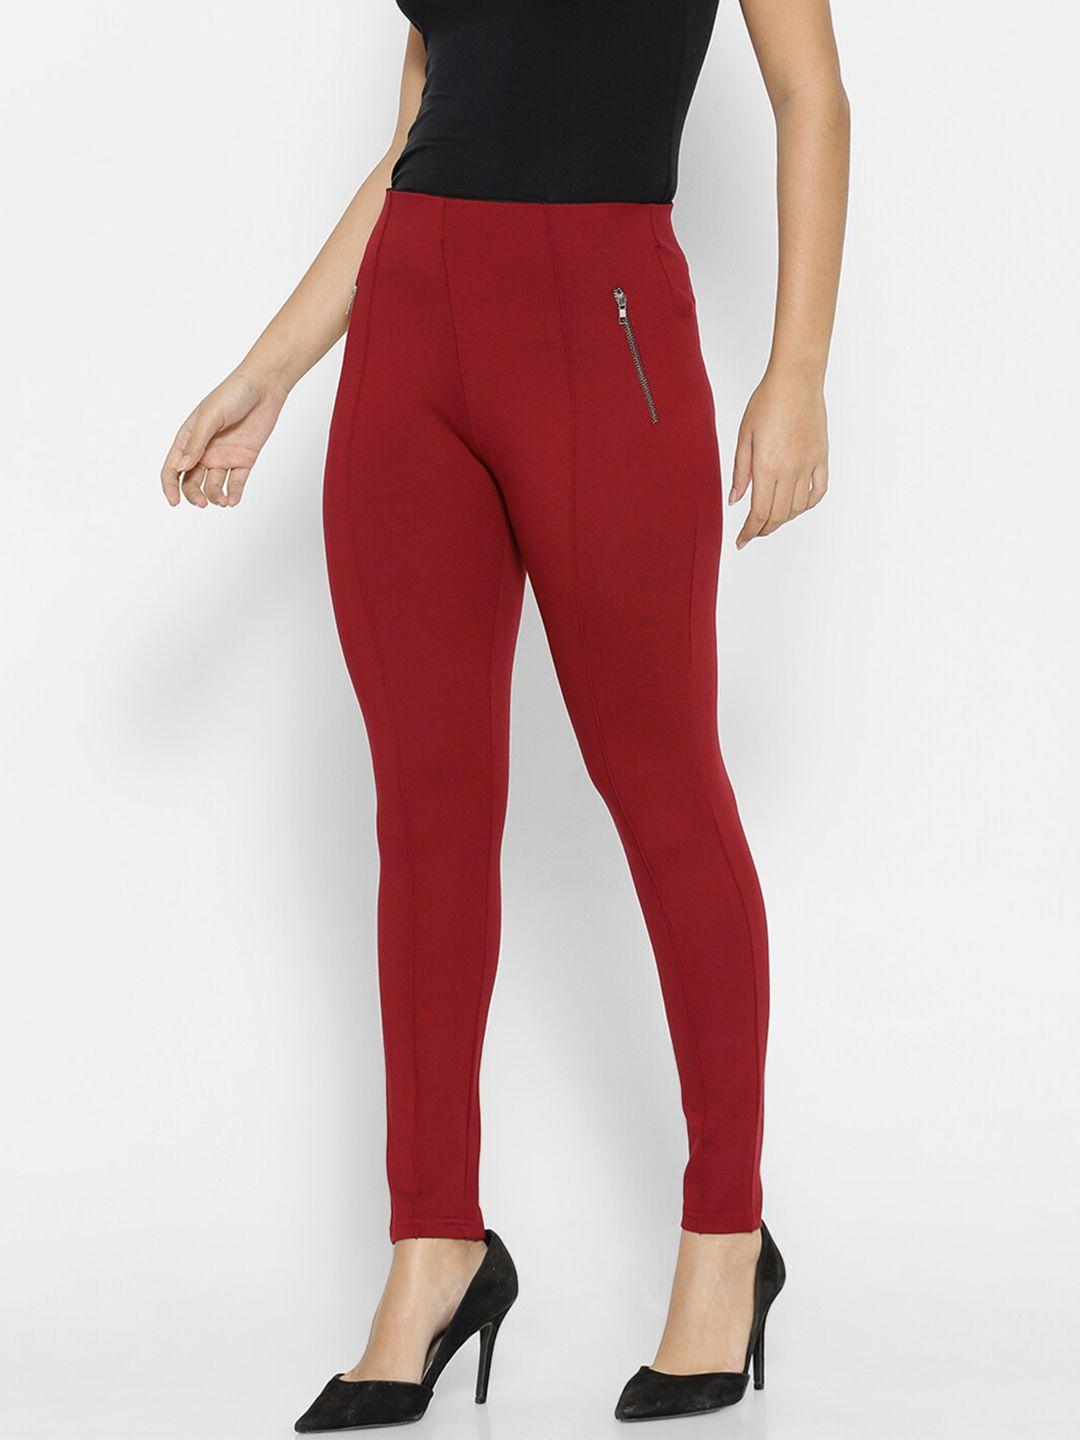 FOREVER 21 Women Maroon Solid Jegging